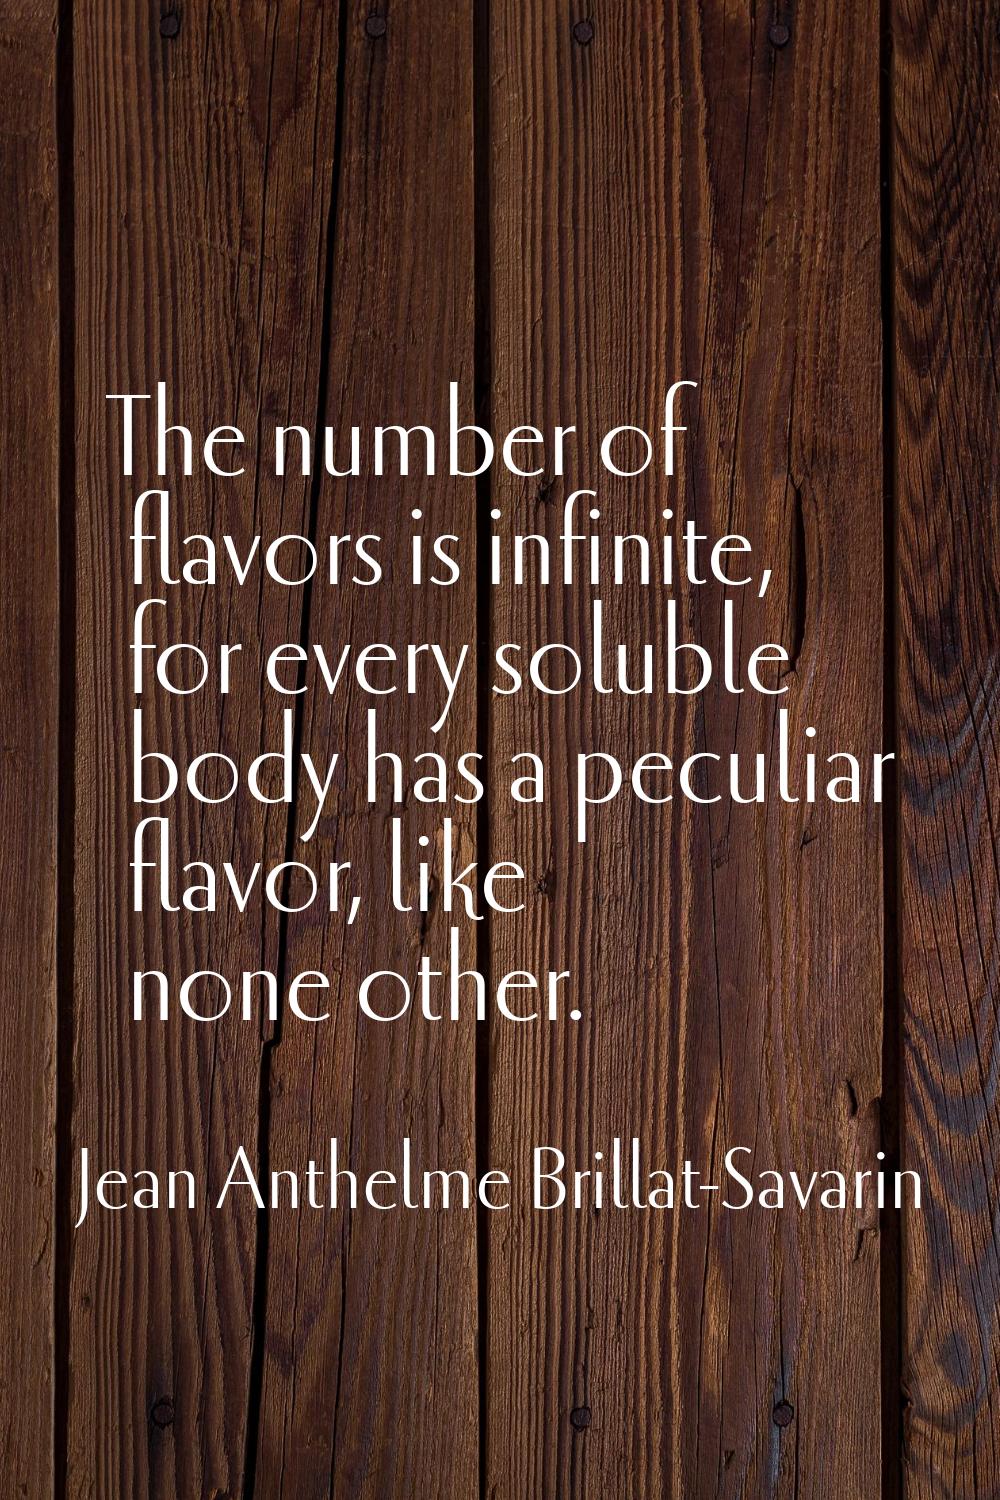 The number of flavors is infinite, for every soluble body has a peculiar flavor, like none other.